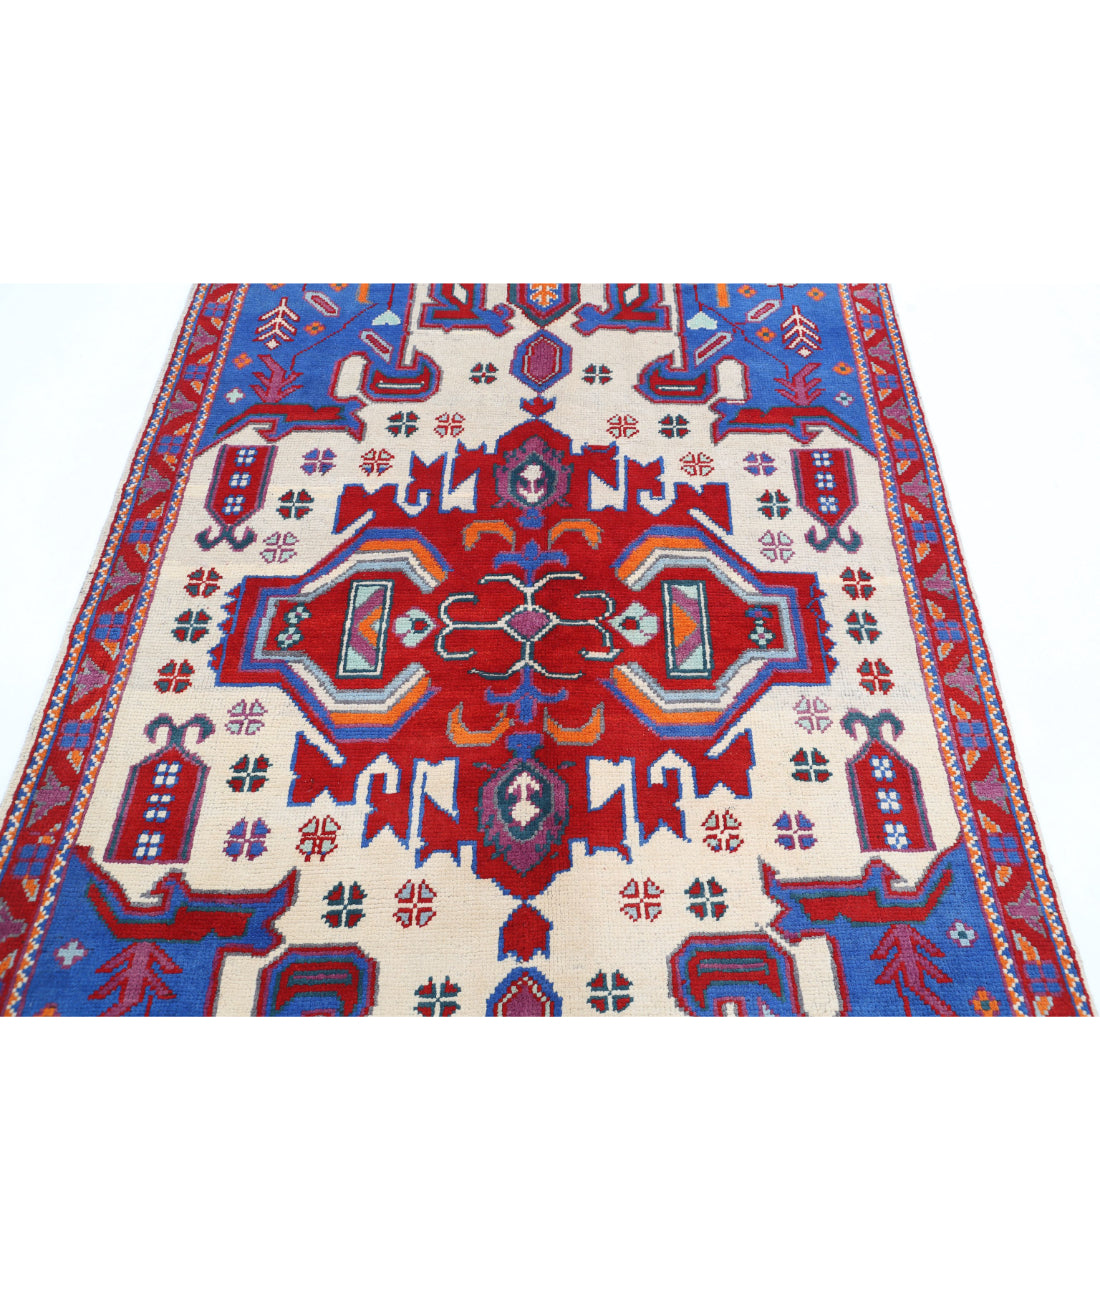 Revival 4'9'' X 6'8'' Hand-Knotted Wool Rug 4'9'' x 6'8'' (143 X 200) / Ivory / Red